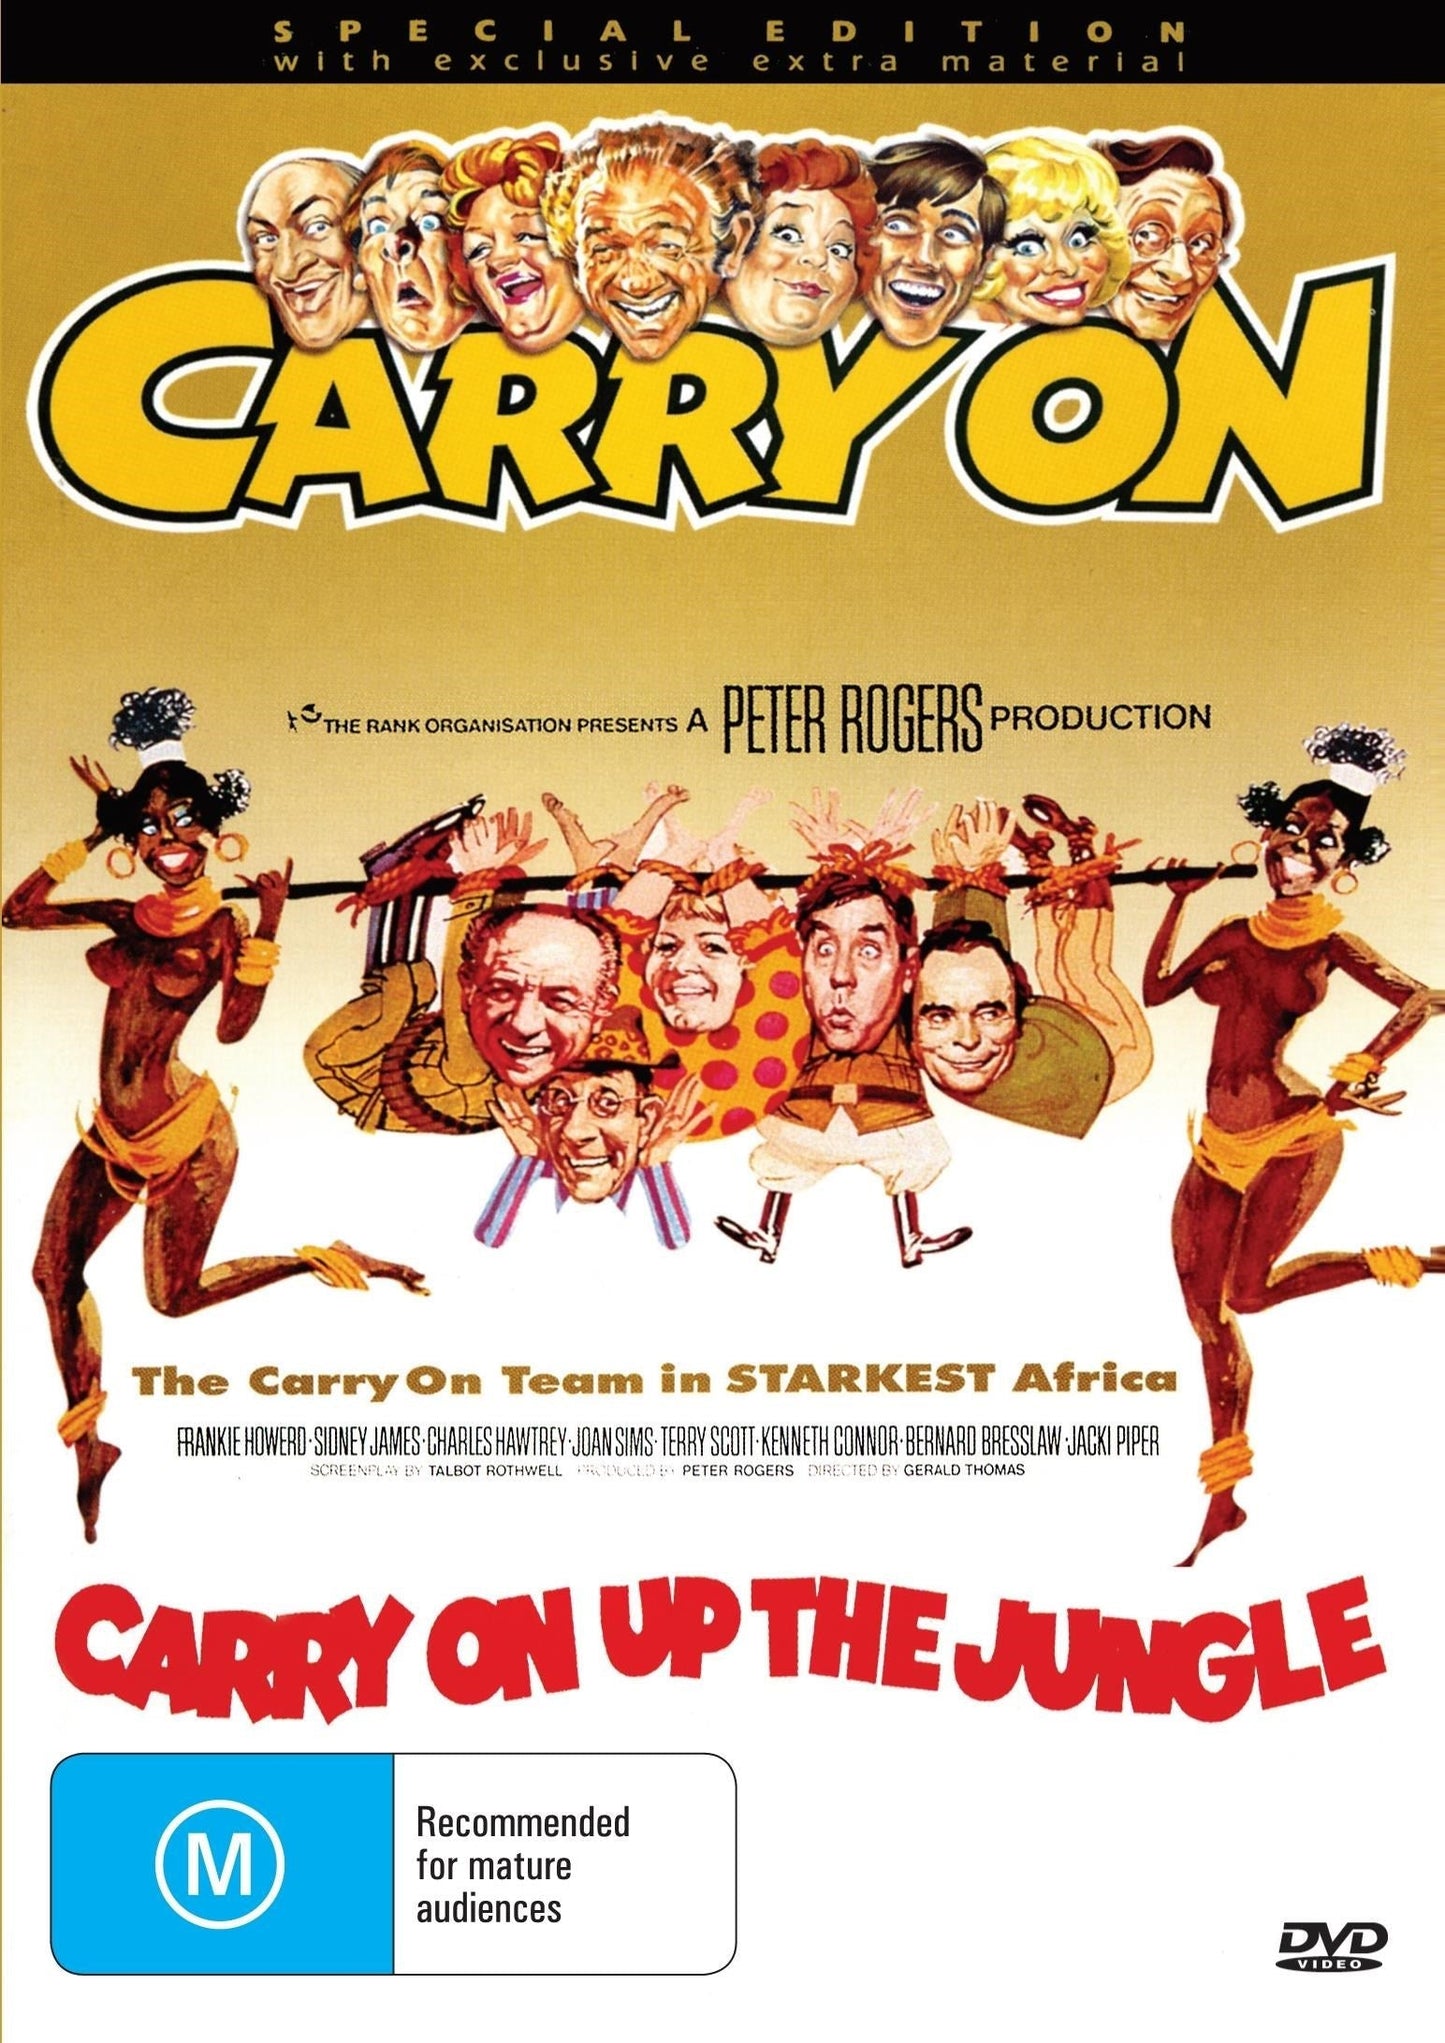 Carry On Up the Jungle rareandcollectibledvds